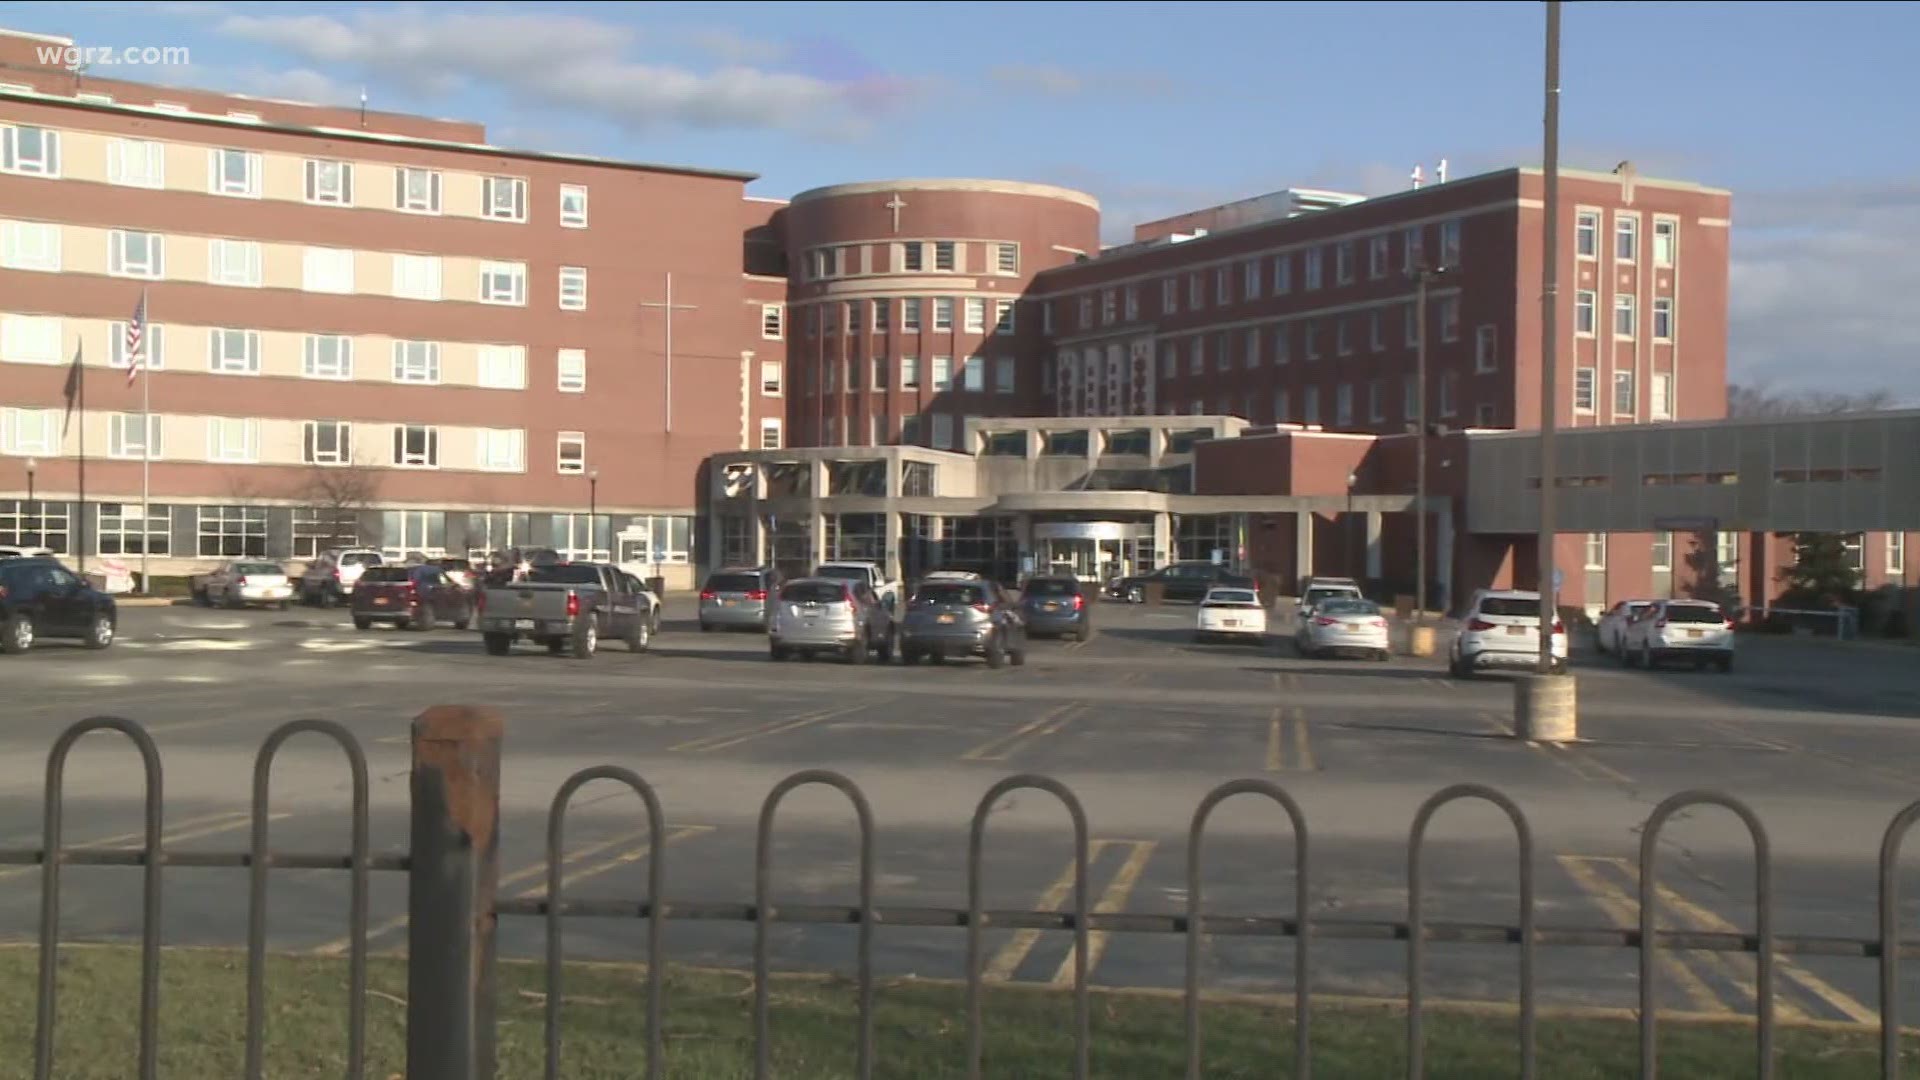 Hospitalizations here in WNY have reached their highest point. of any time in the pandemic,
Channel 2 has been looking into the numbers.